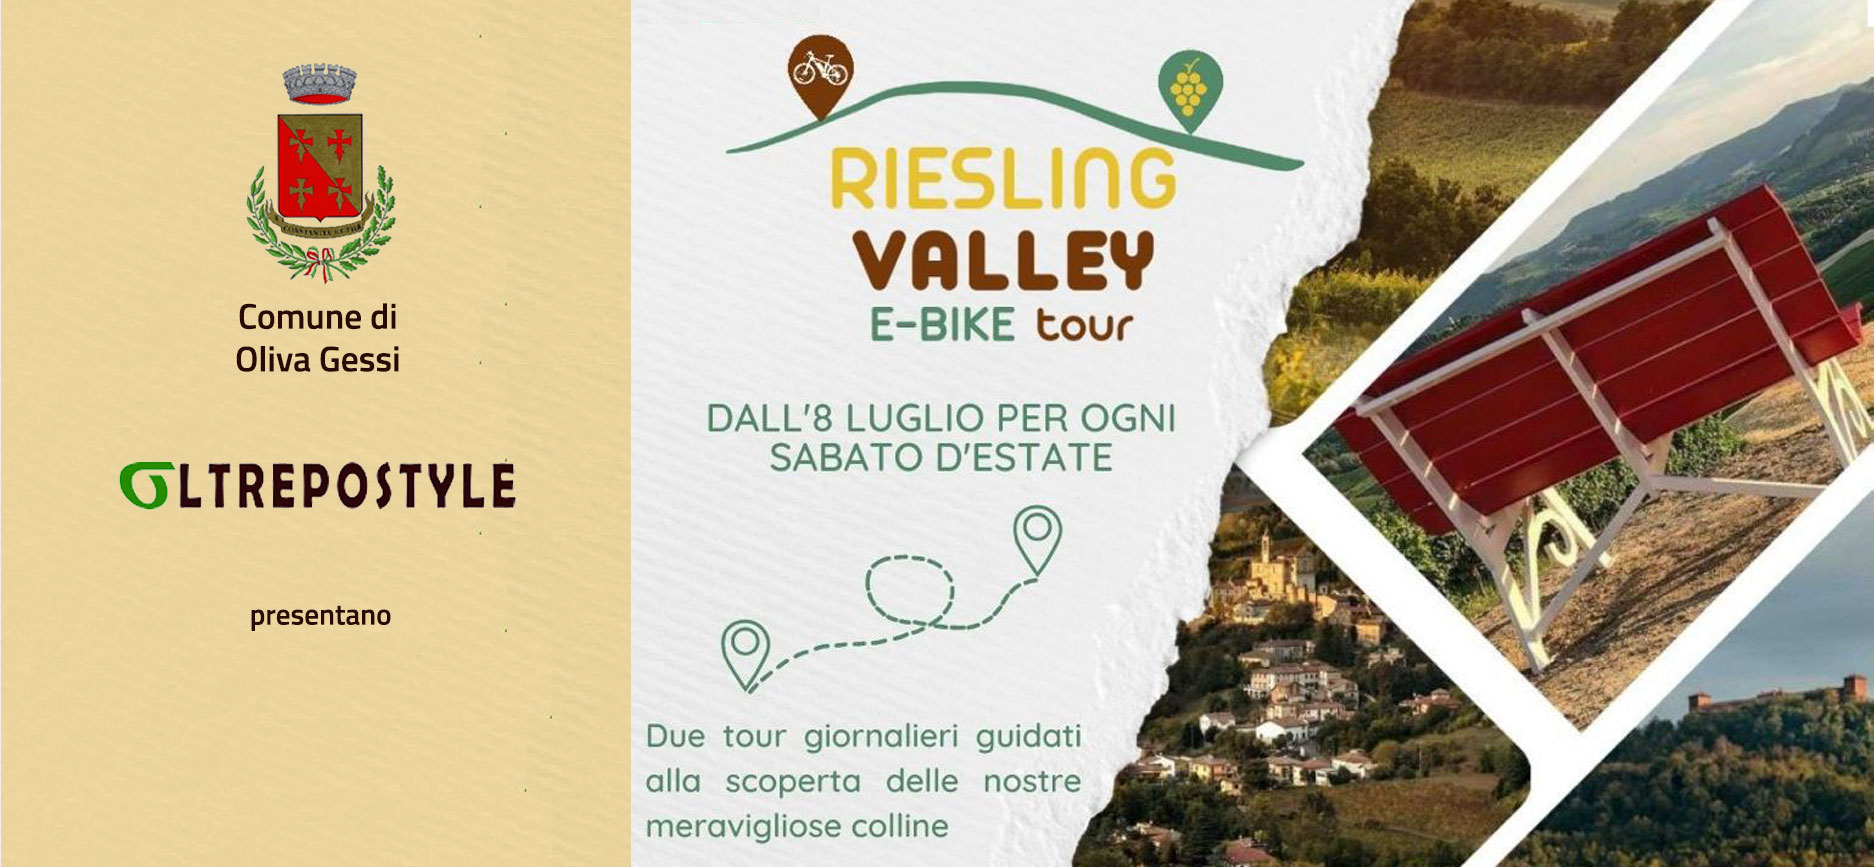 Riesling Valley E-Bike Tour